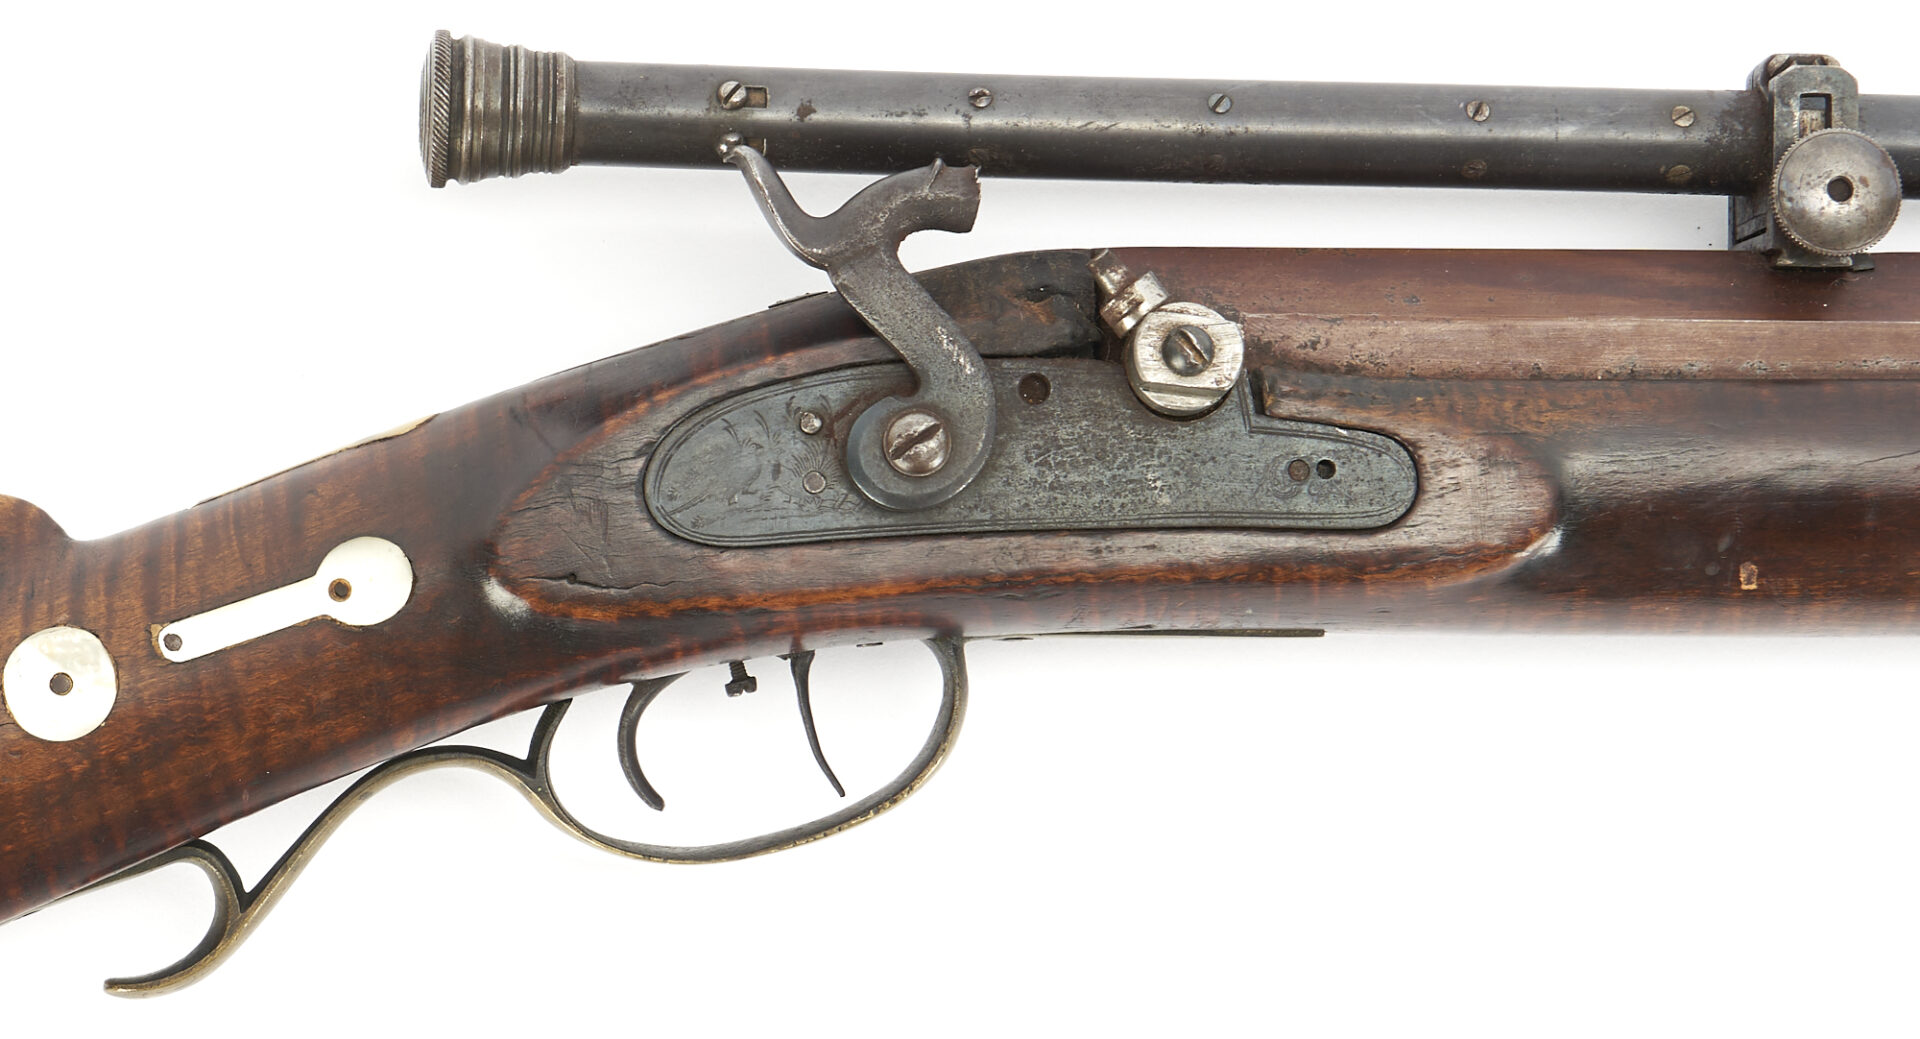 Lot 526: Percussion Rifle w "L.N. Mogg" Scope, MoP Inlay; Walter Cline Collection